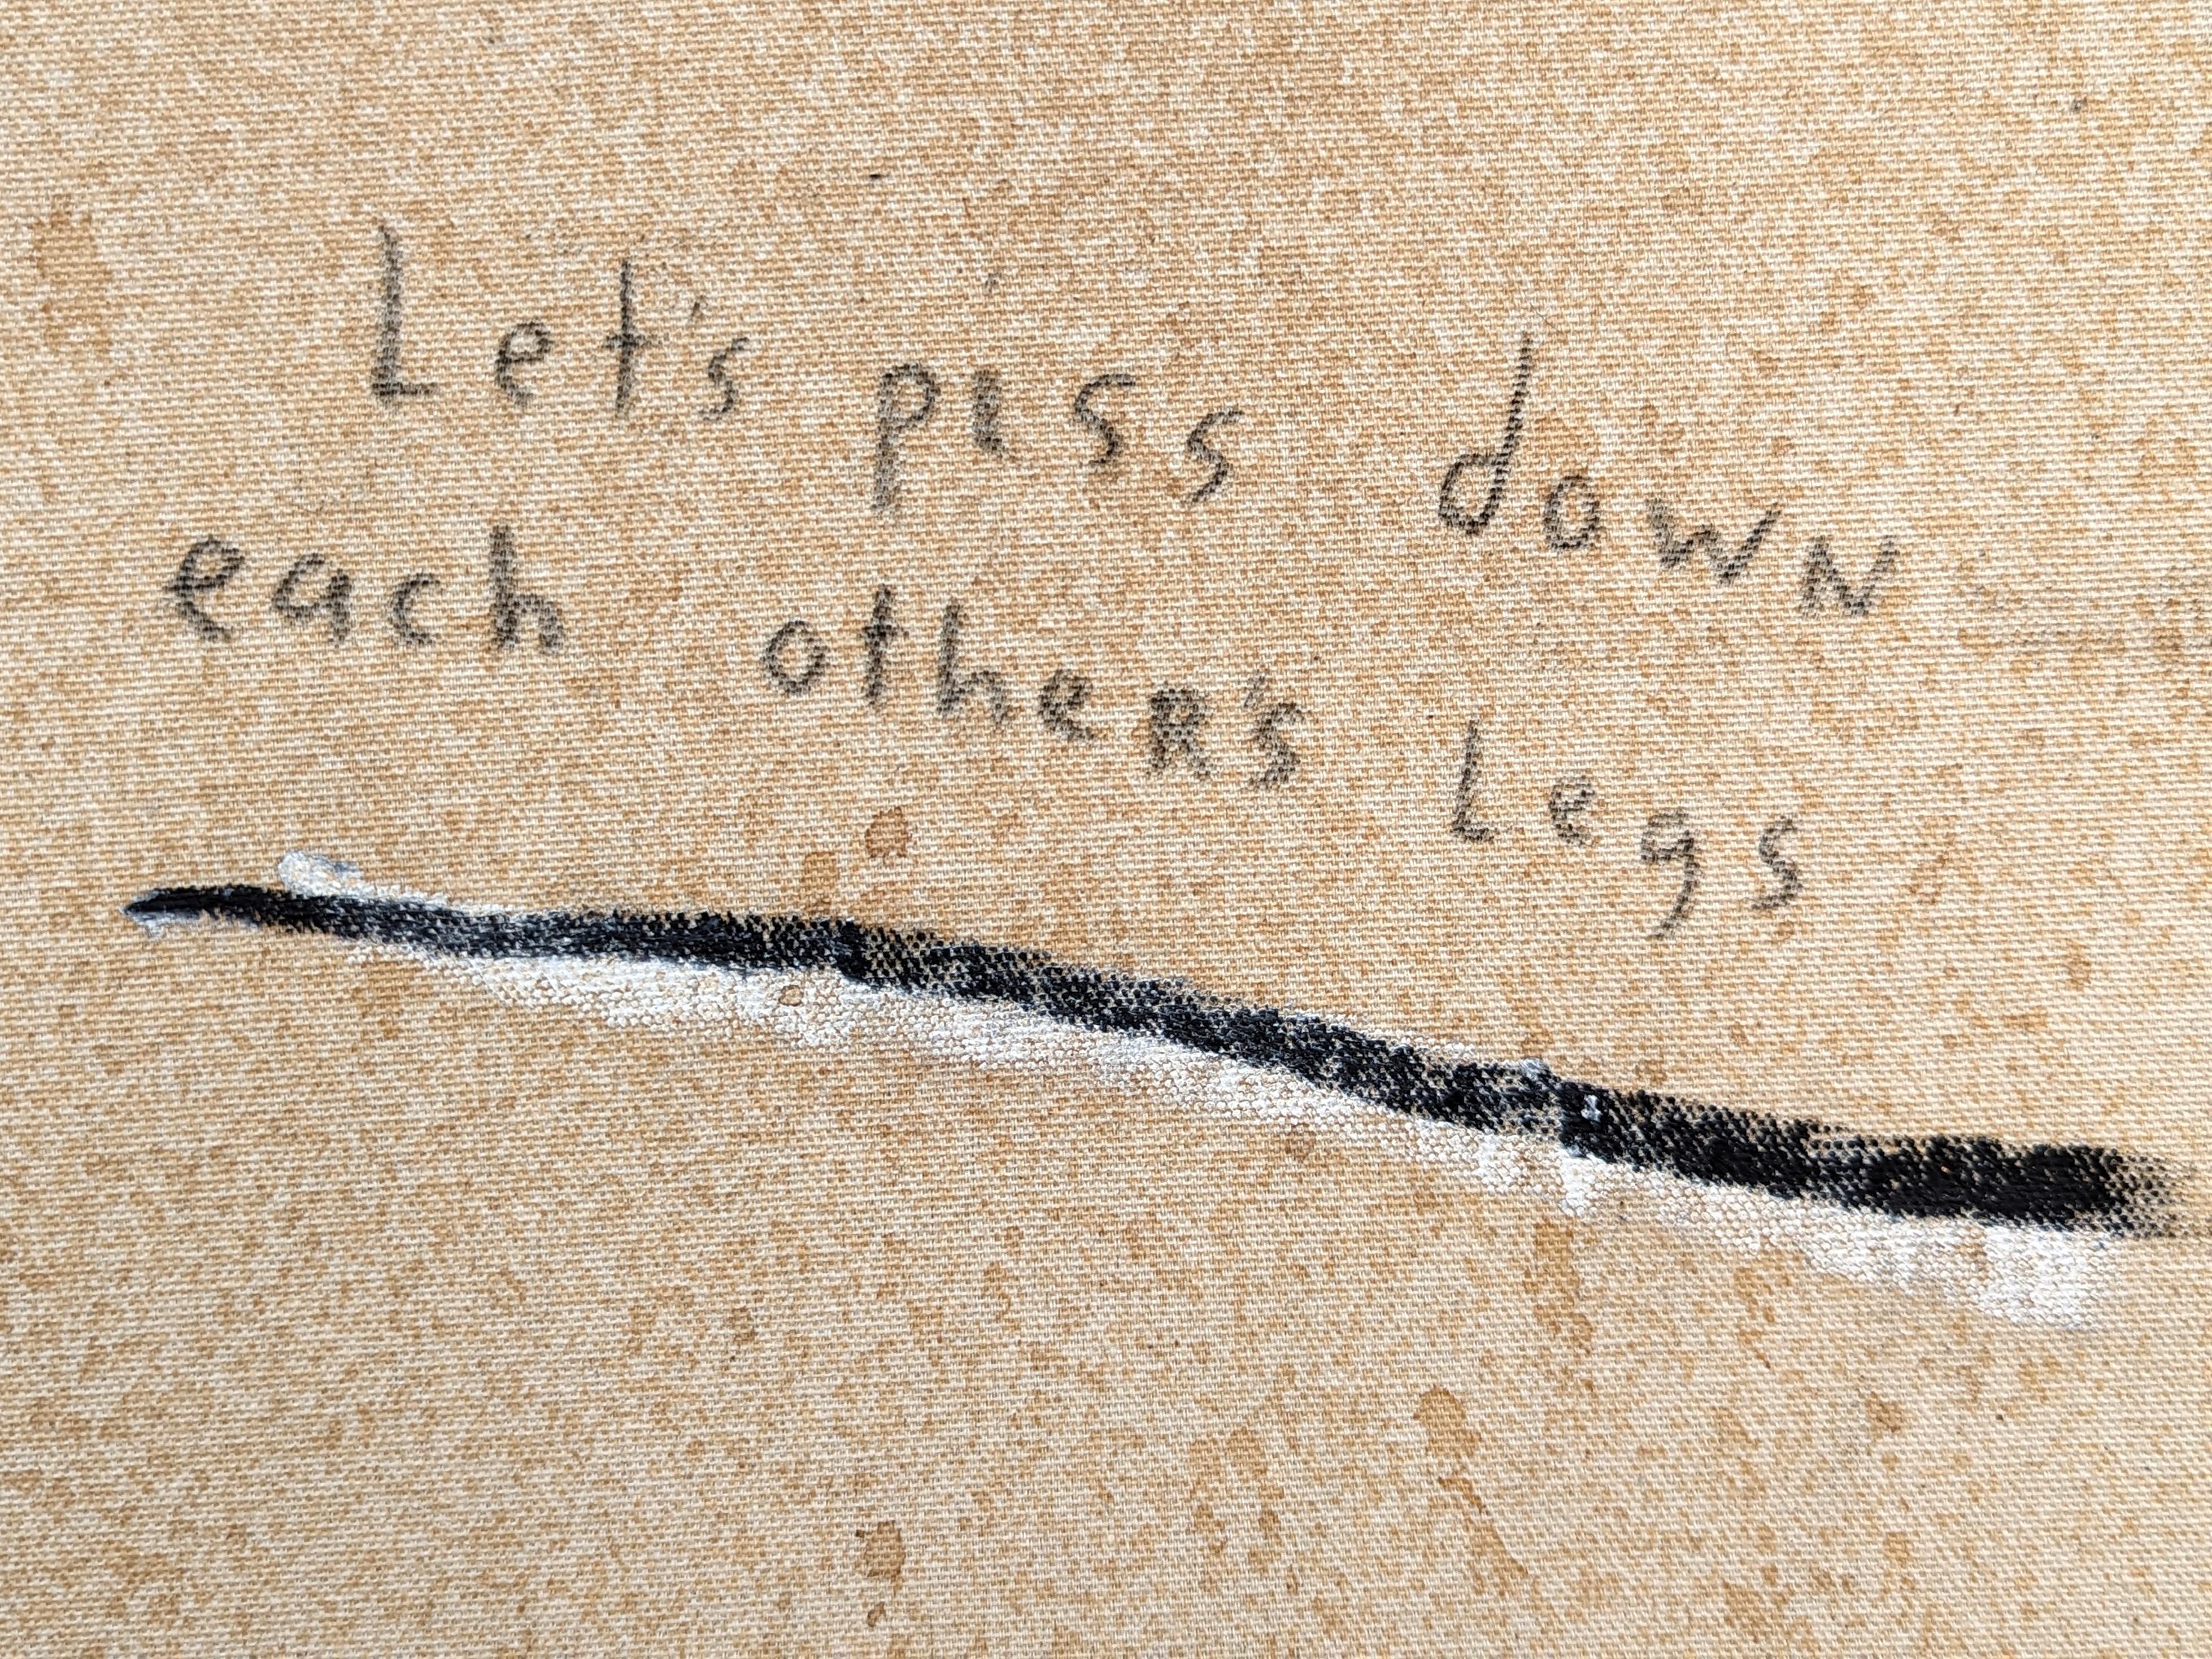 “Let's Piss Down Each Other's Legs” Contemporary Black & Tan Text Painting For Sale 2